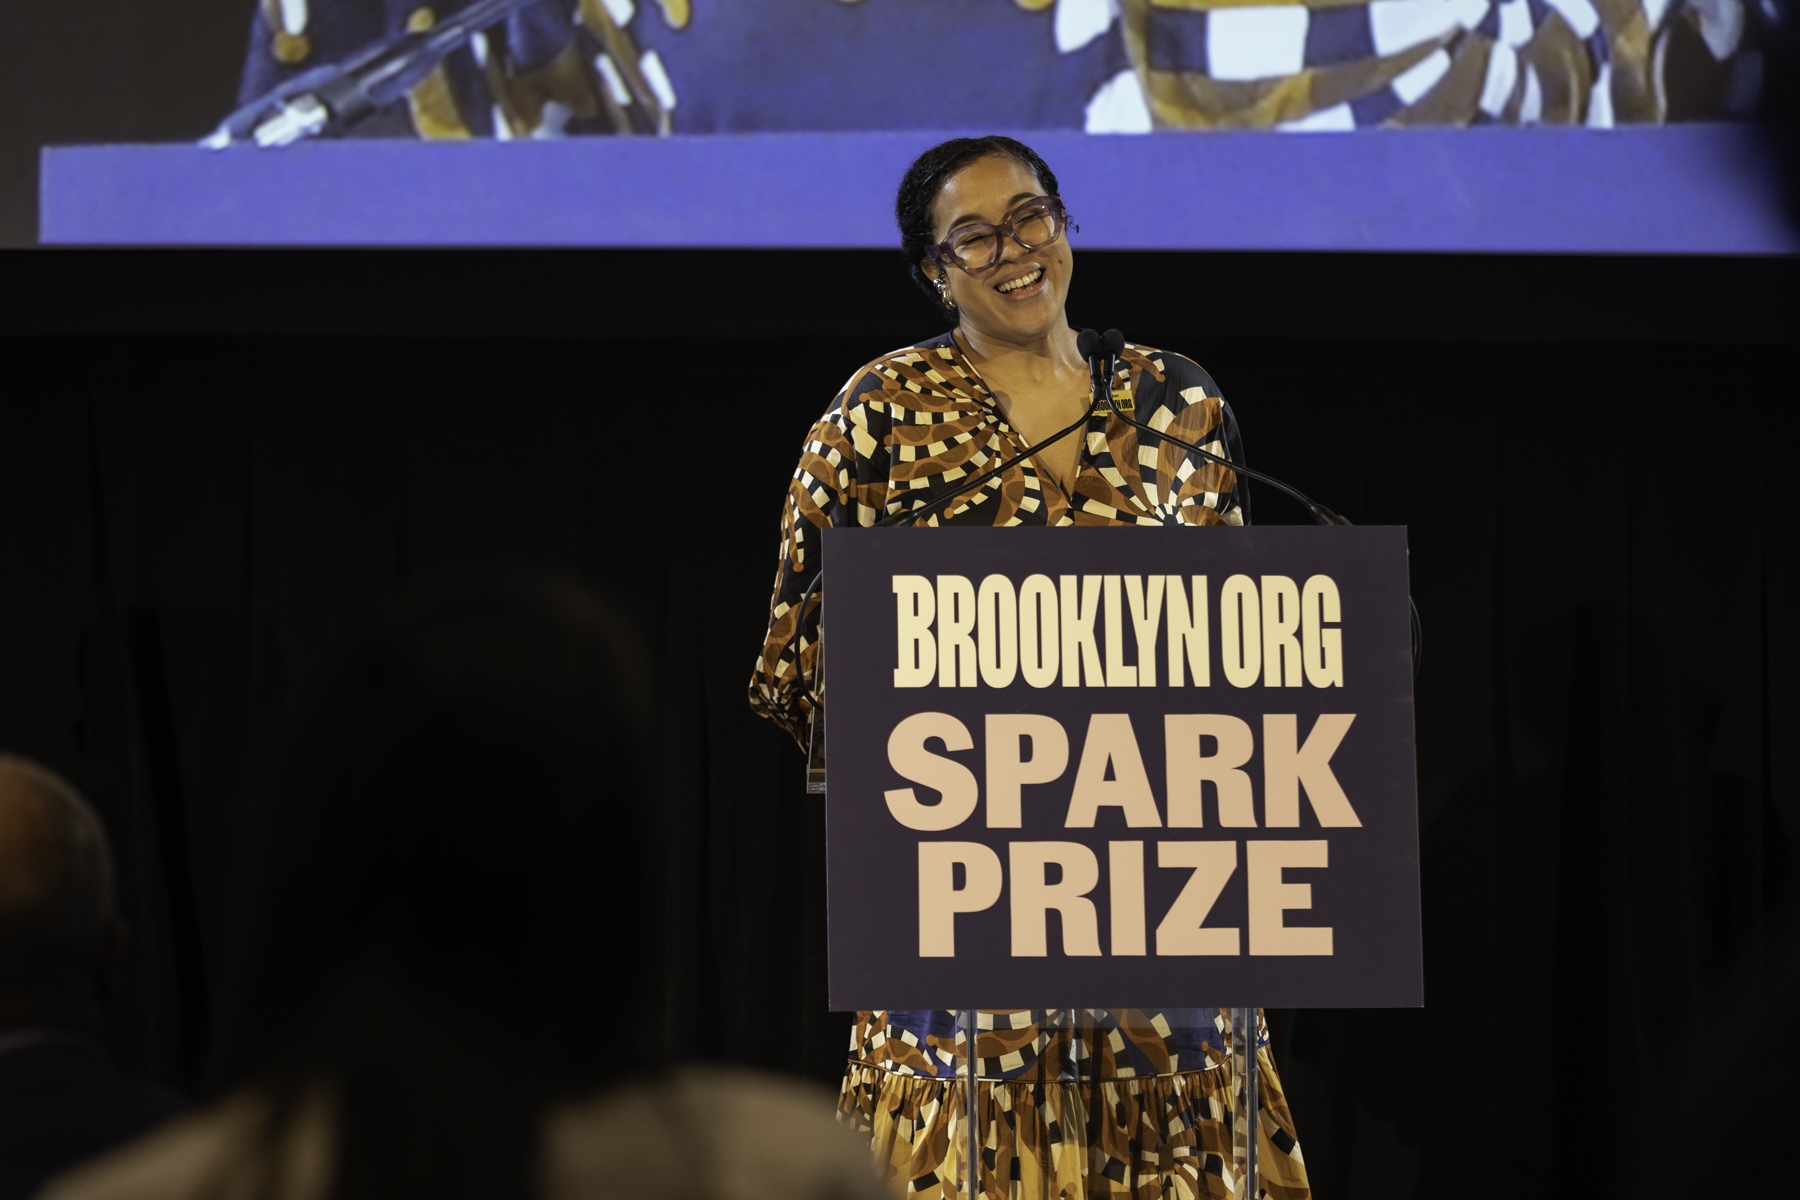 Woman speaking at the brooklyn.org spark prize event.